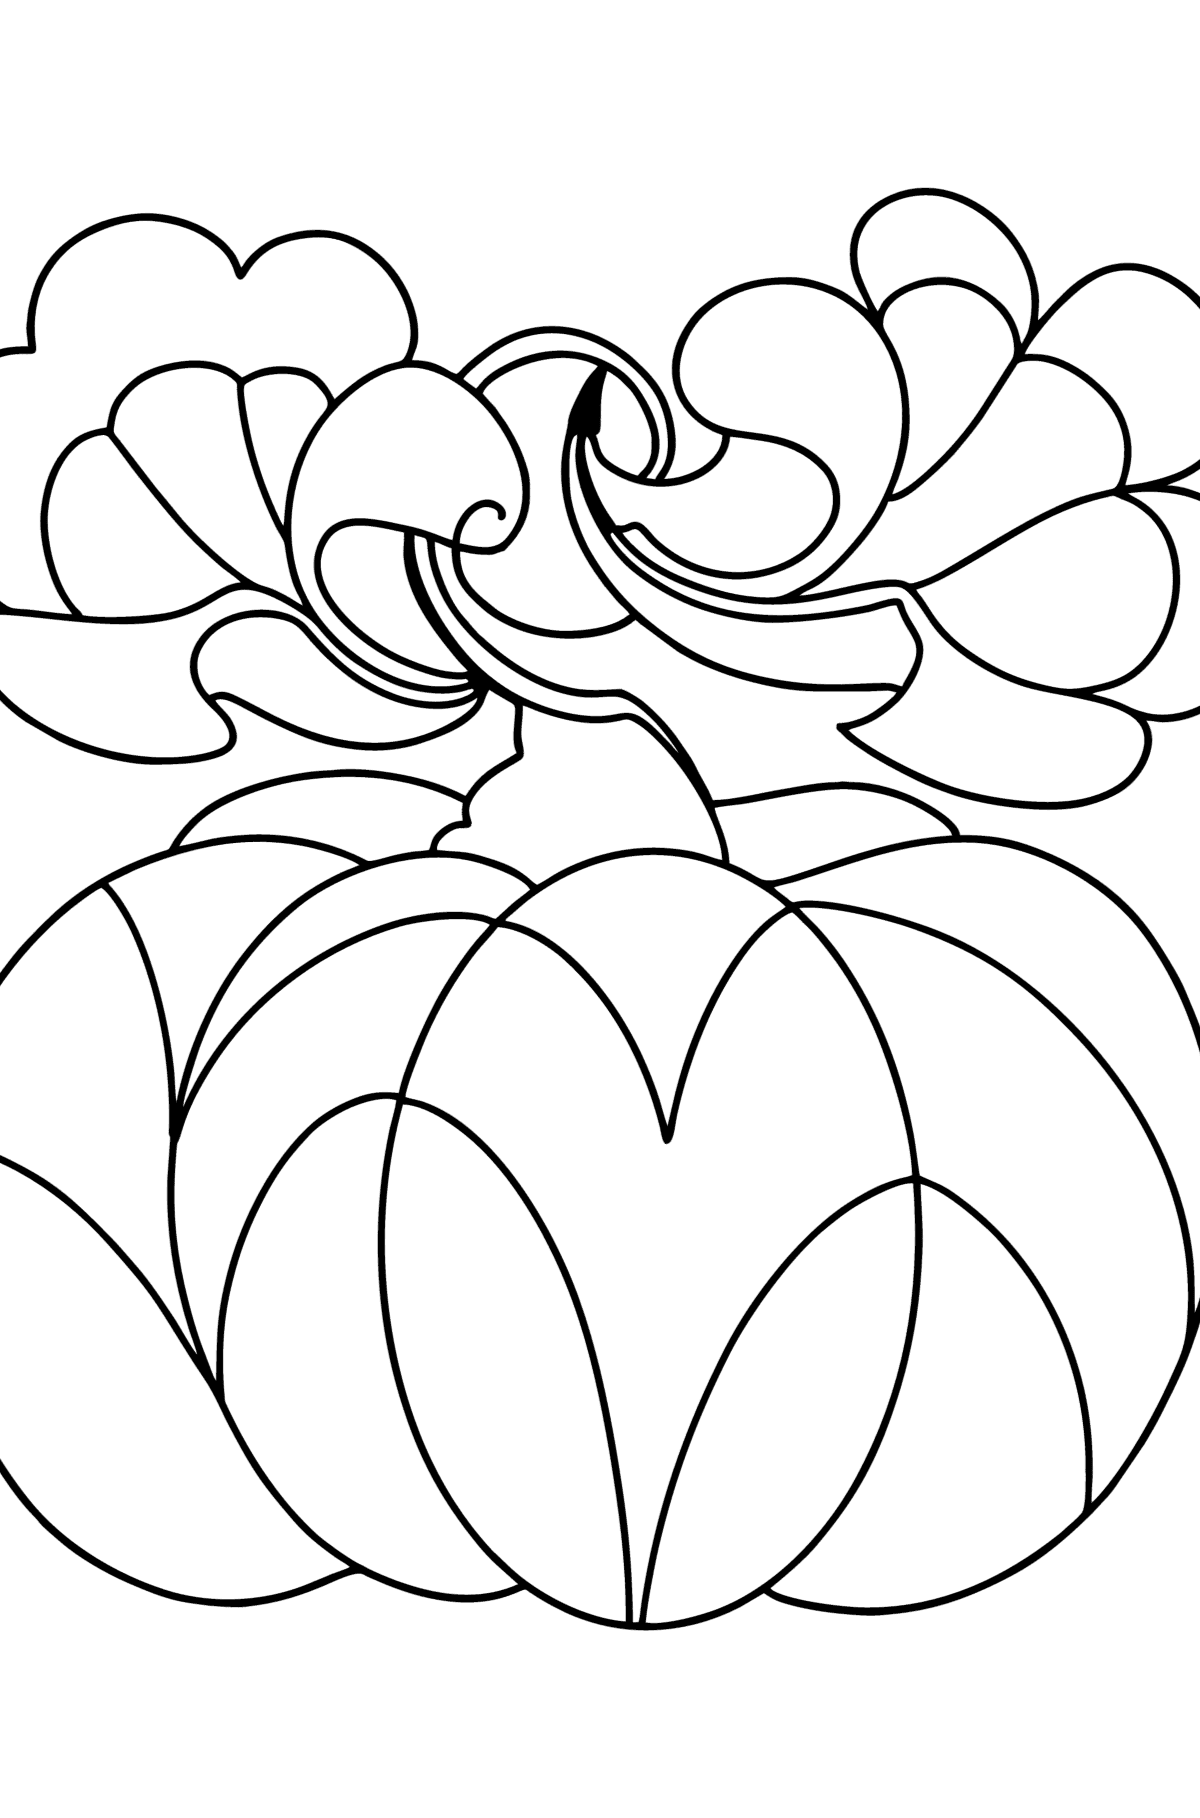 Calming Anti stress Pumpkin coloring page - Coloring Pages for Kids